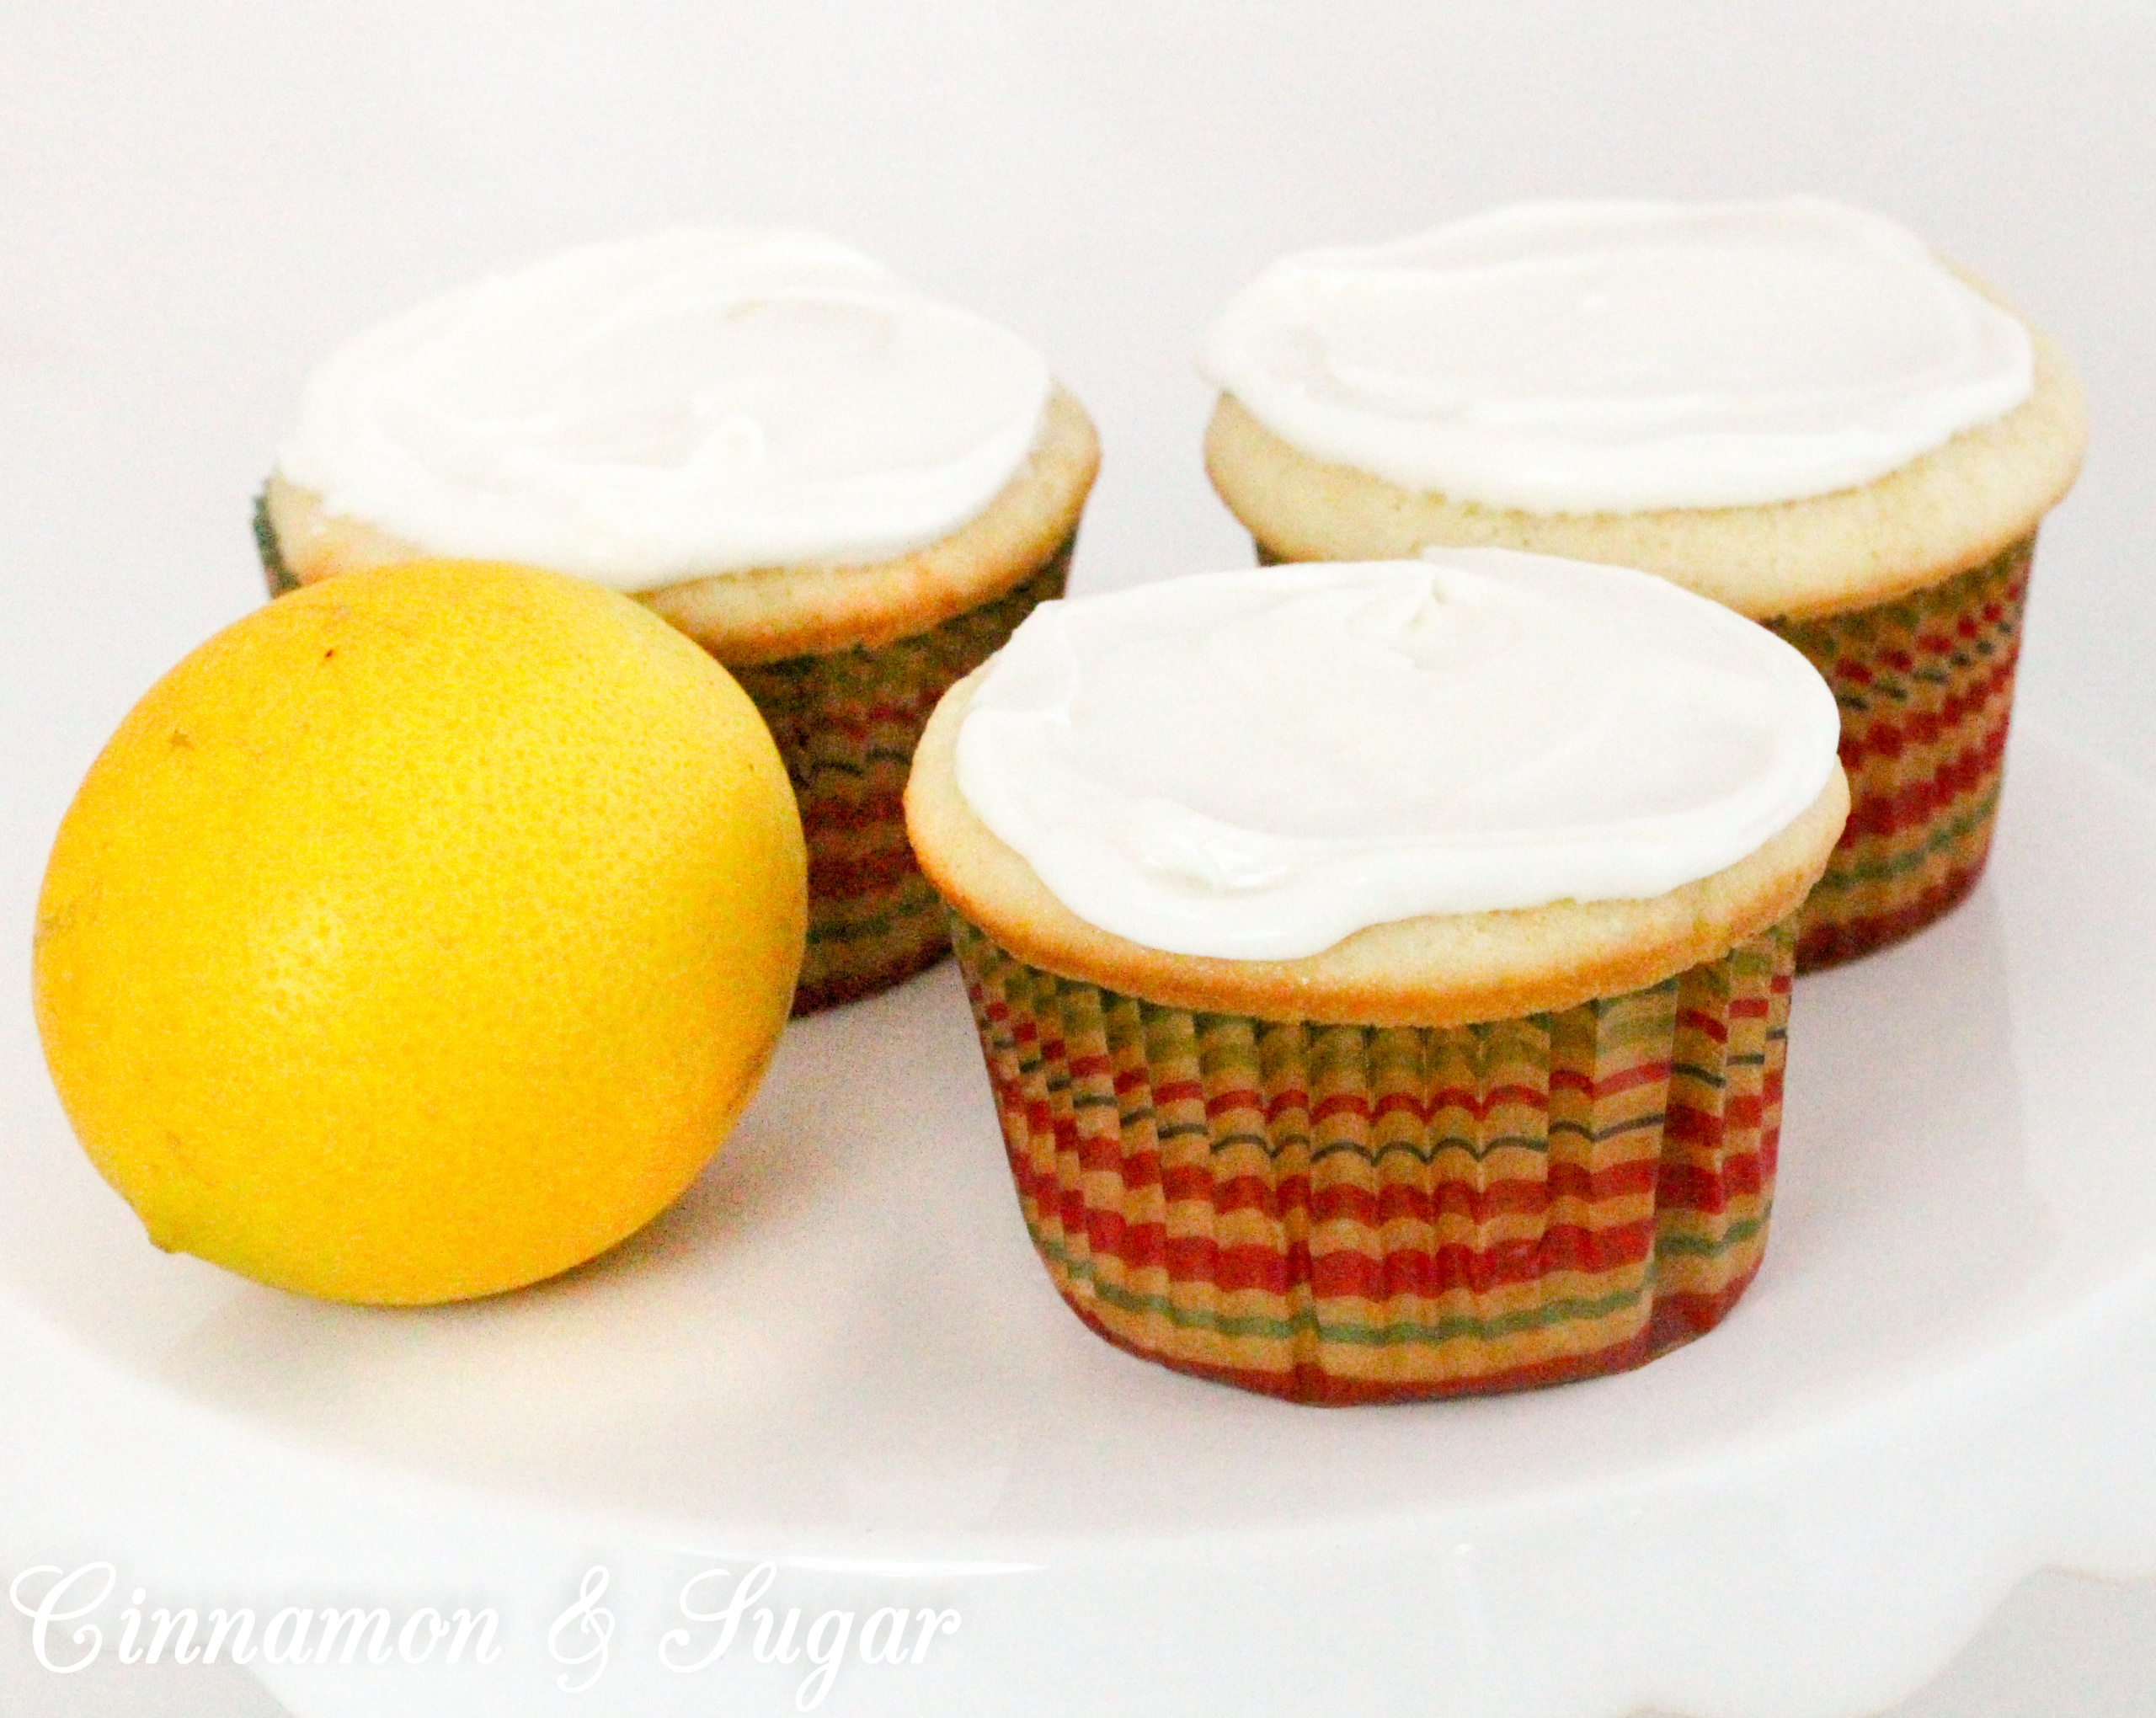 Lemony cream cheese frosting tops little lemon cakes that are super moist thanks to a generous dollop of sour cream. Perfect for afternoon tea or brunch! Recipe shared with permission granted by Maureen Klovers, author of MURDER IN THE MOONSHINE. 